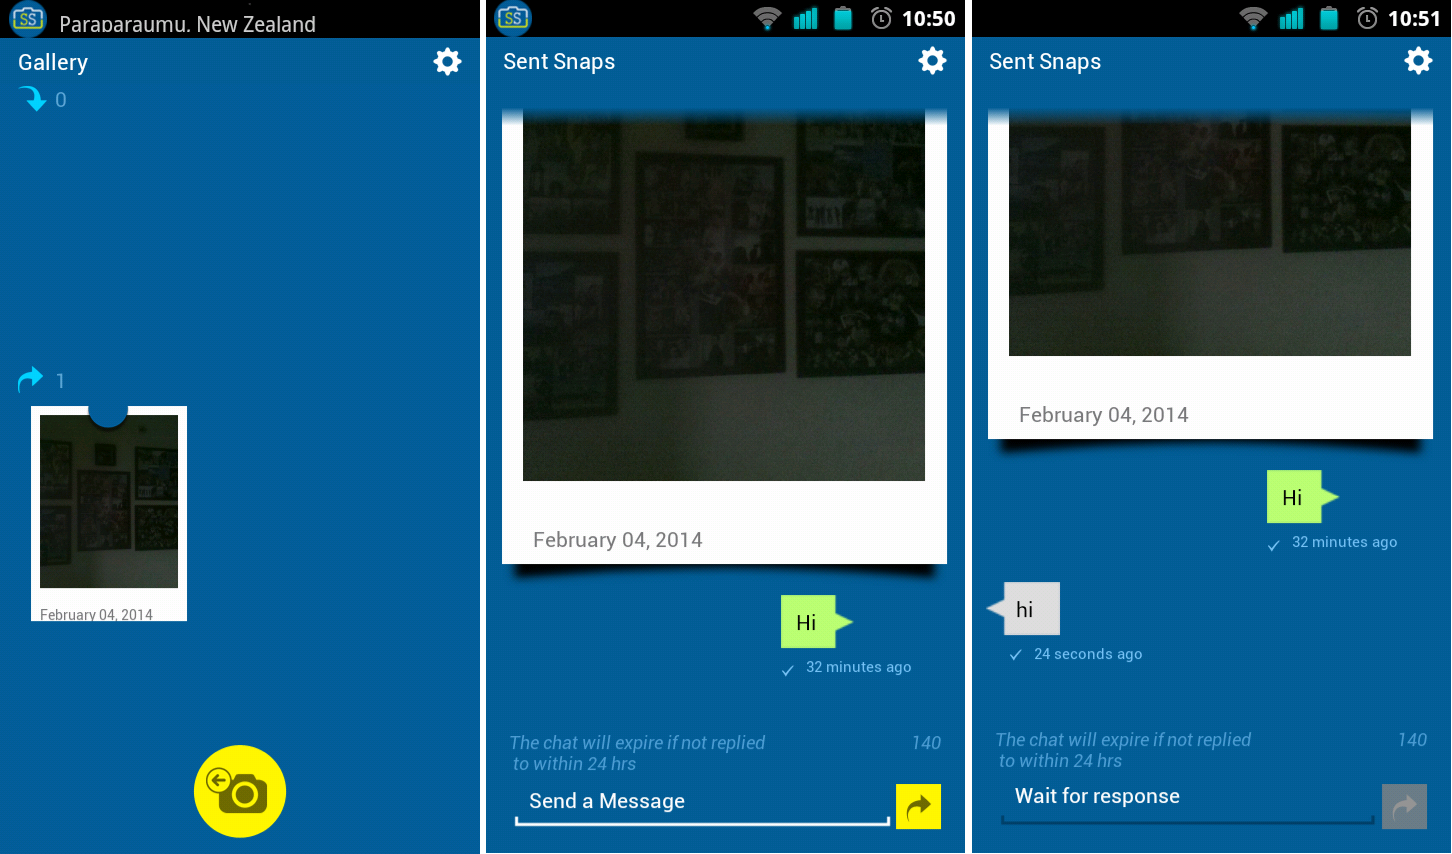 SnapSwap Android app images